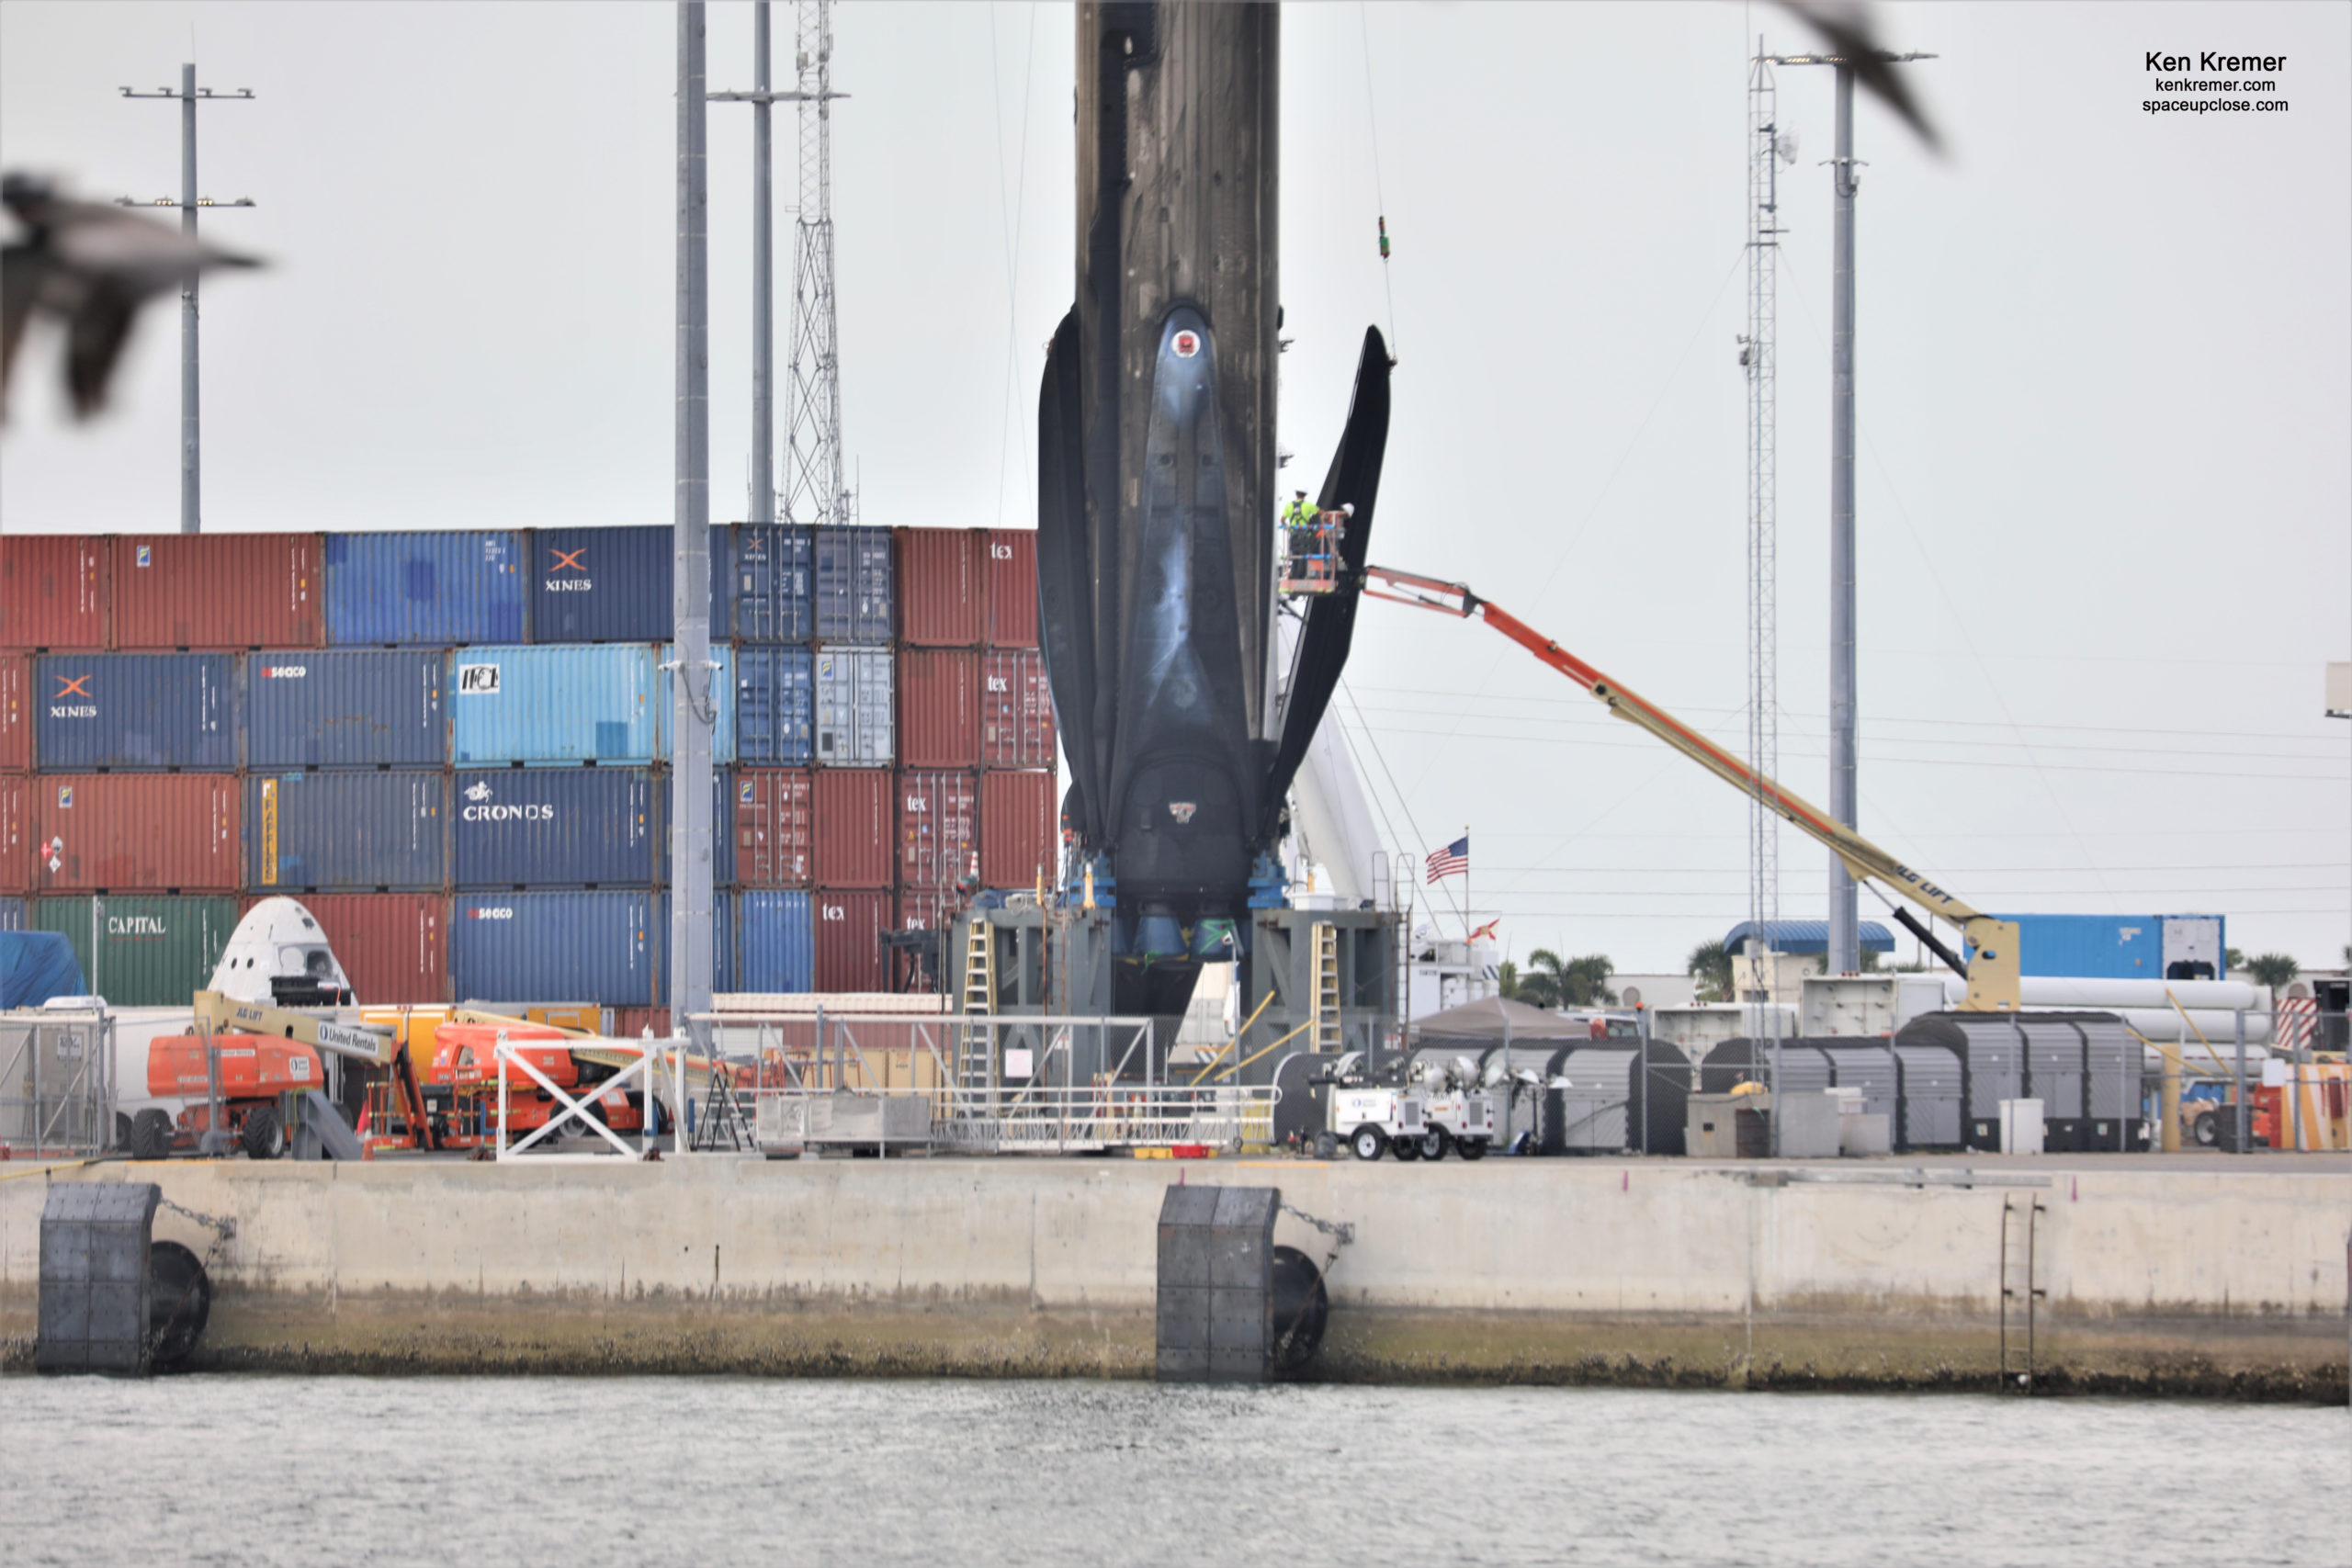 All Landing Legs Retracted on 1st 5X Launched/Landed SpaceX Falcon 9 Booster at Port Canaveral: Photos